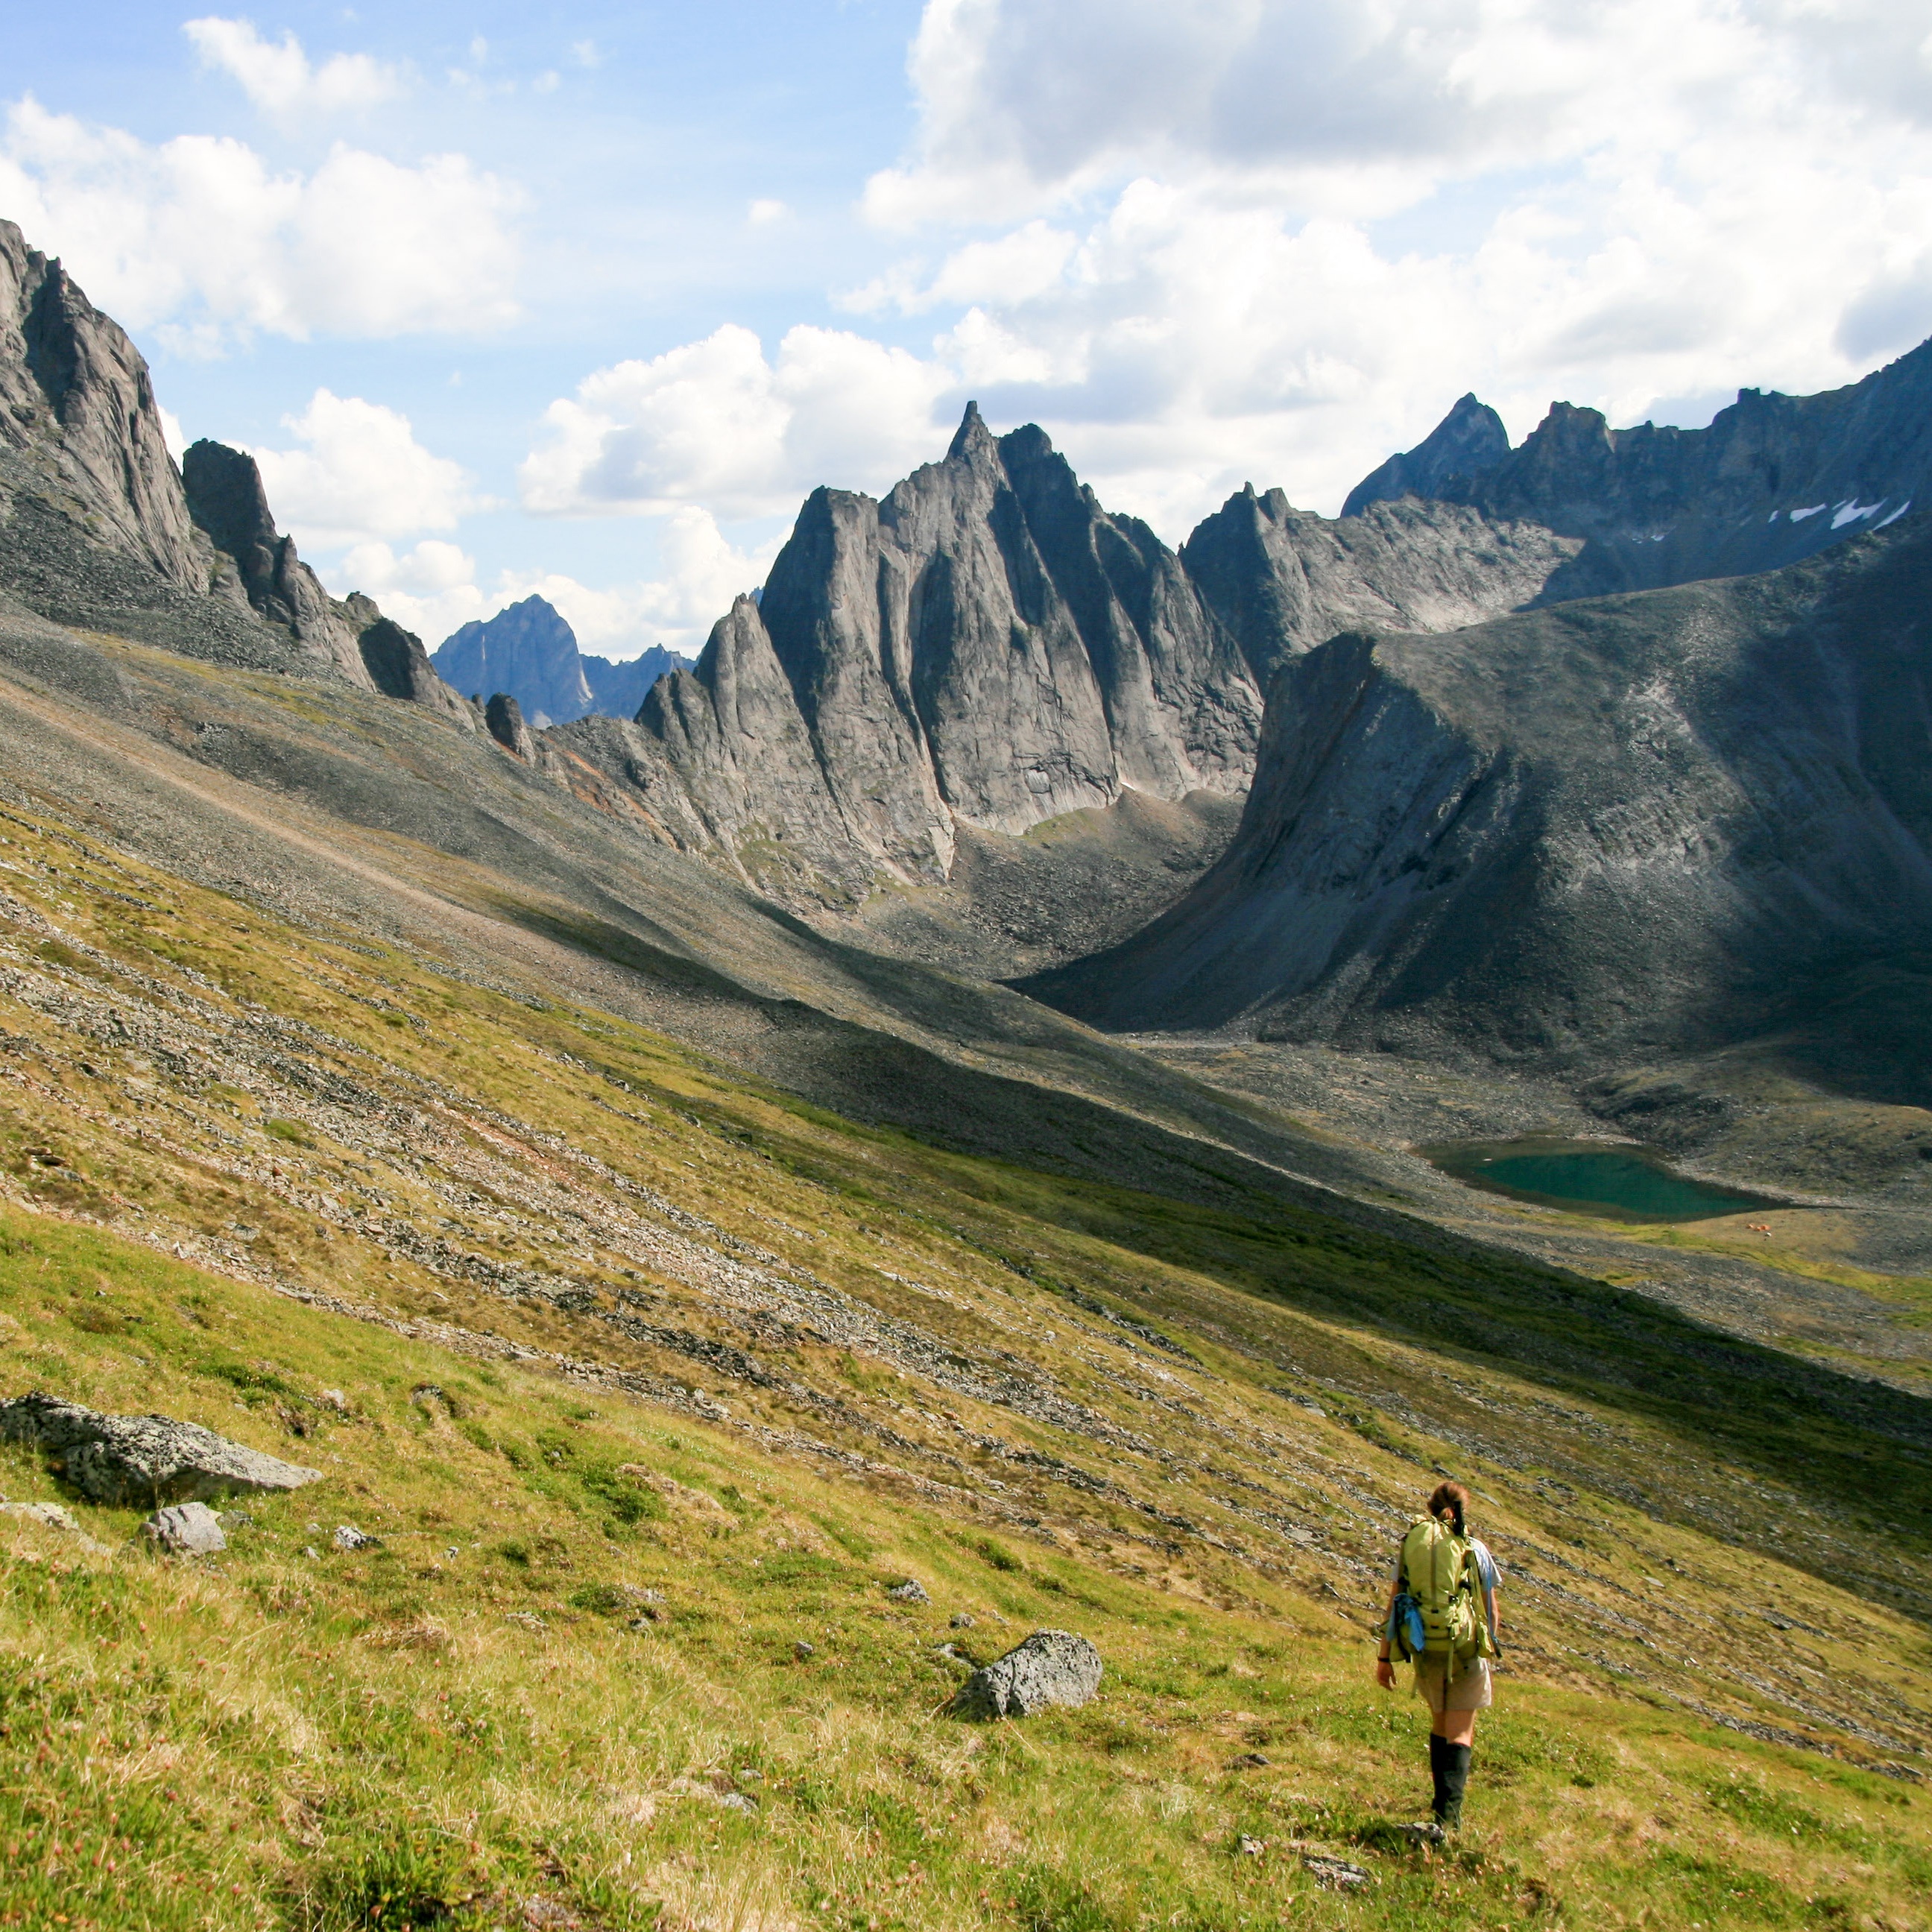 Backpacker hikes through grassy foothills in the Yukon wiht high, steep peaks in the background